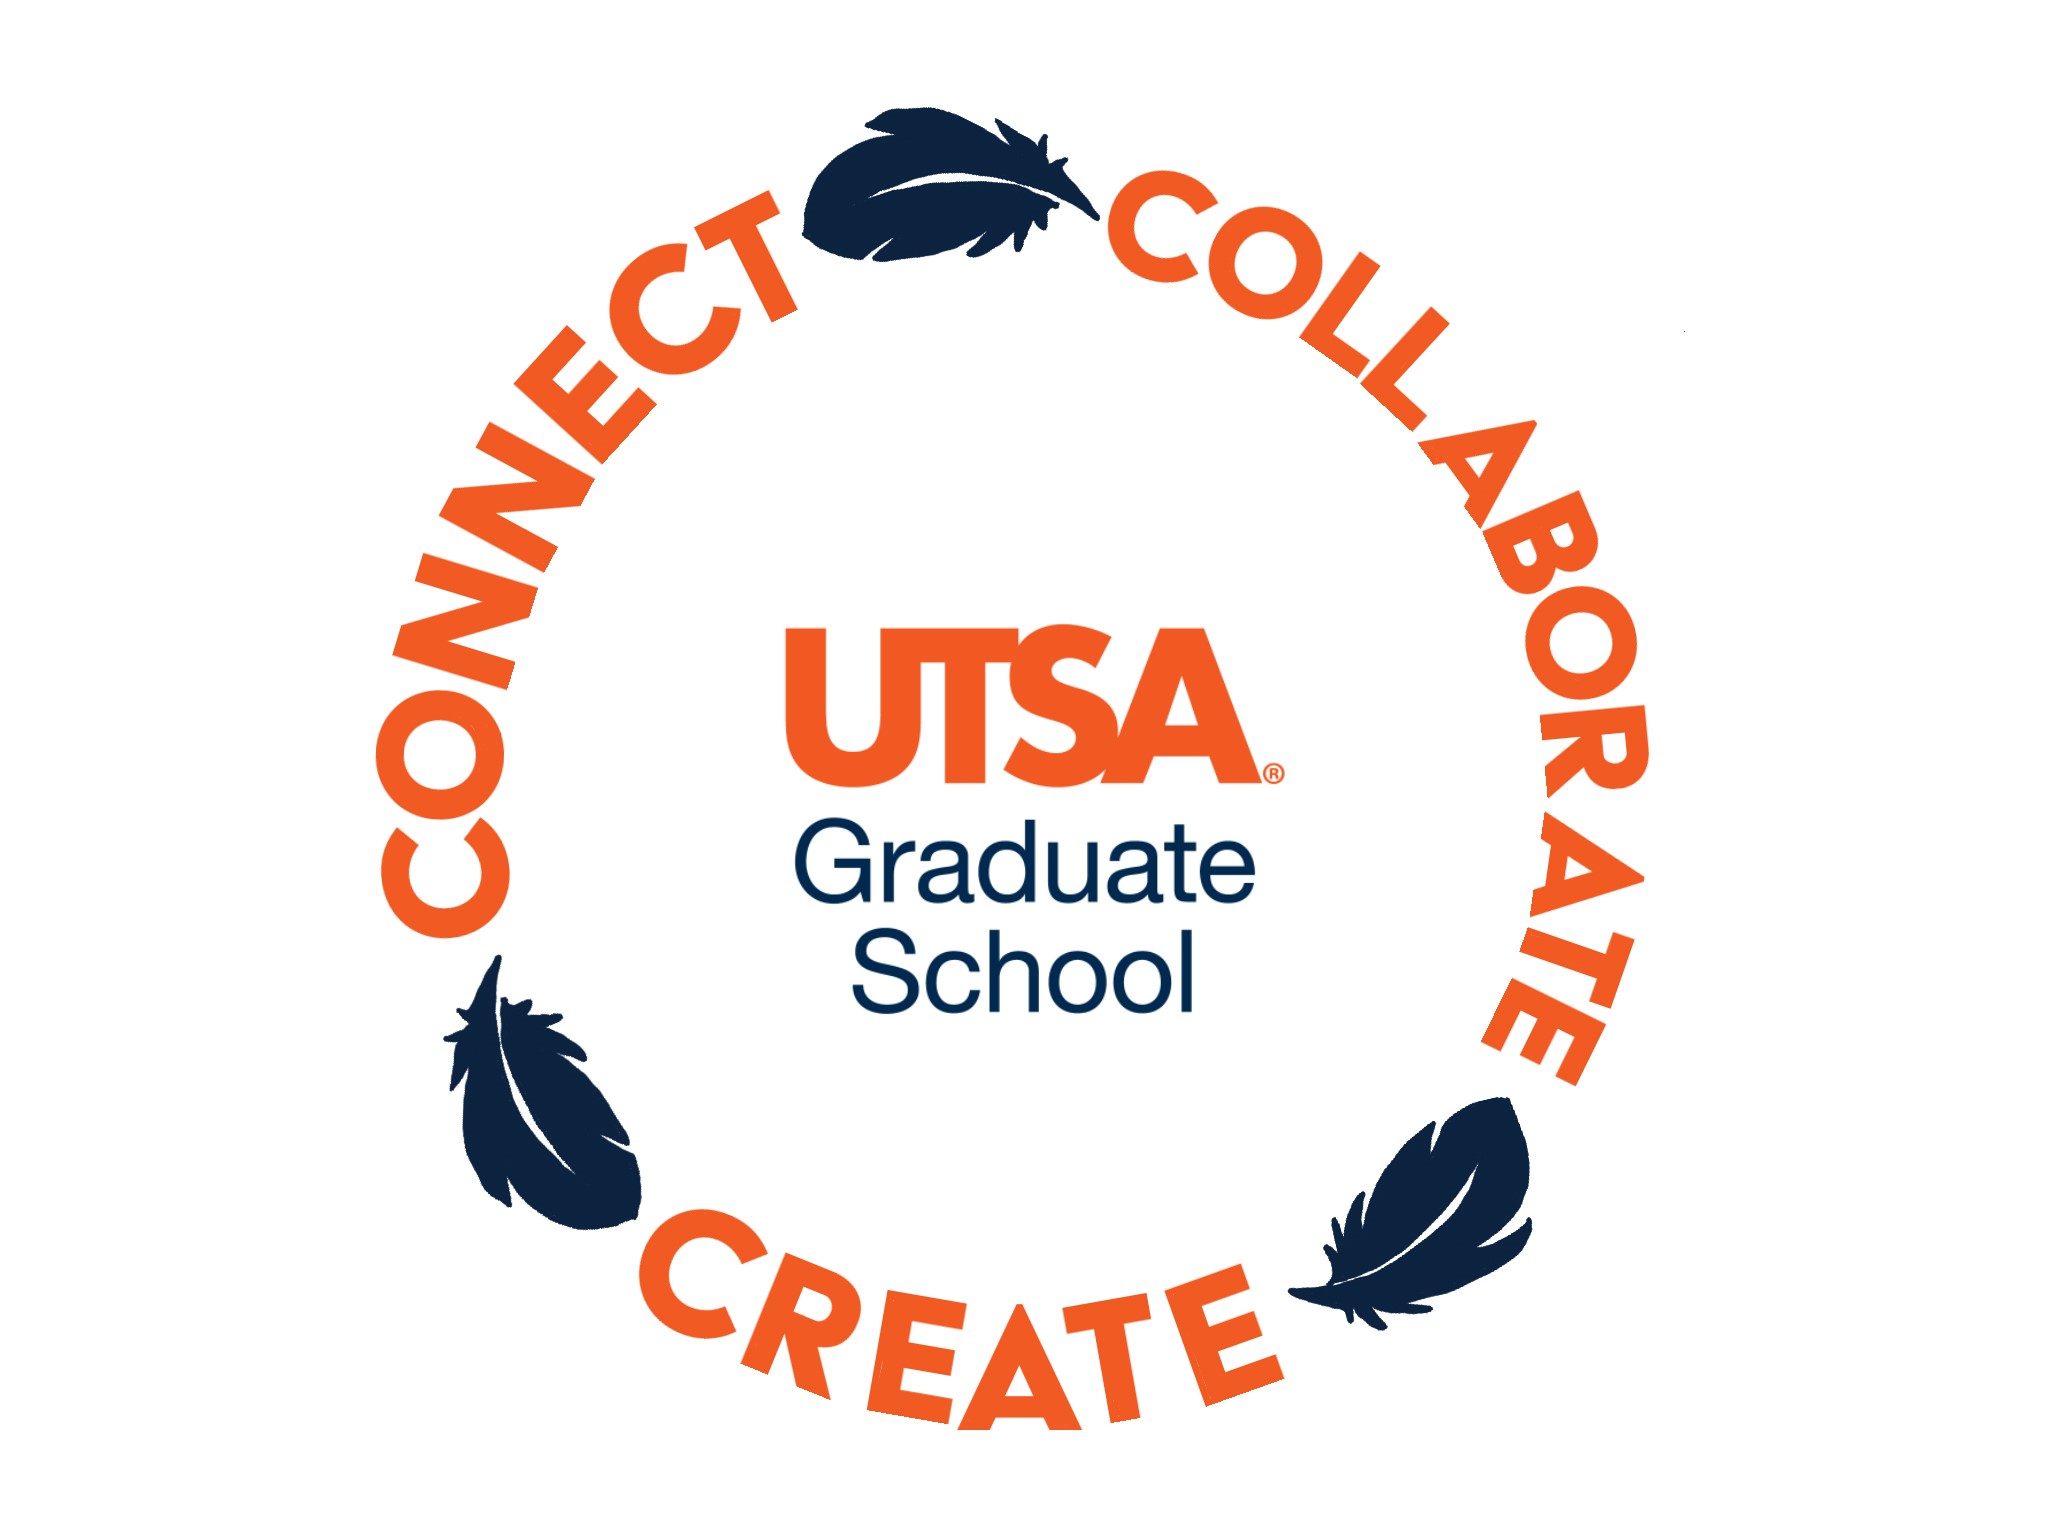 Graduate School logo with text Connect, Collaborate Connect